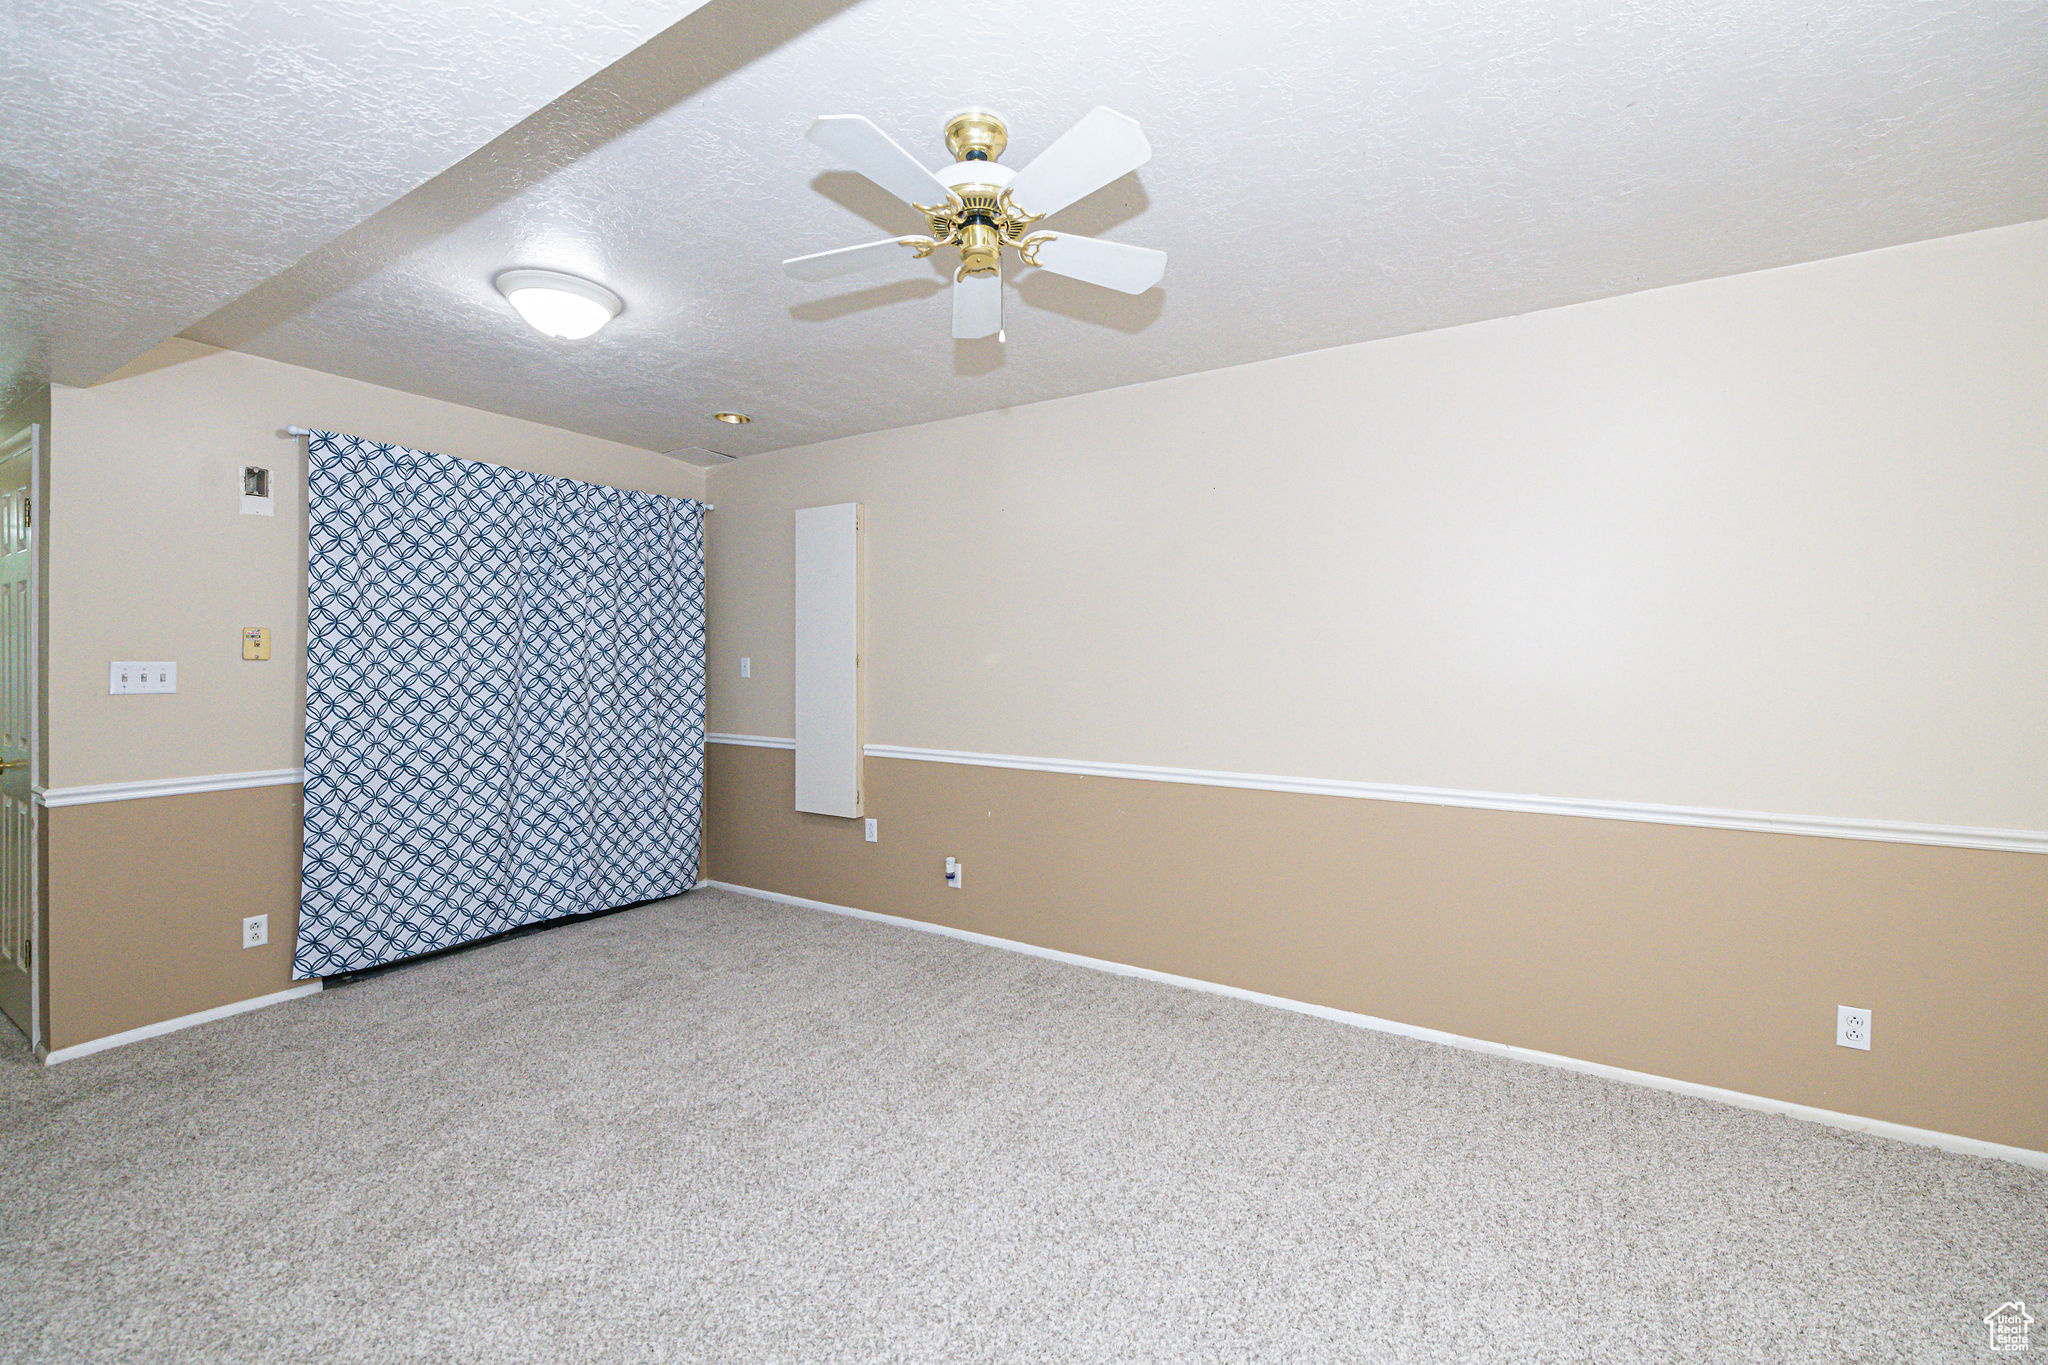 Spare room with a textured ceiling, ceiling fan, and light carpet